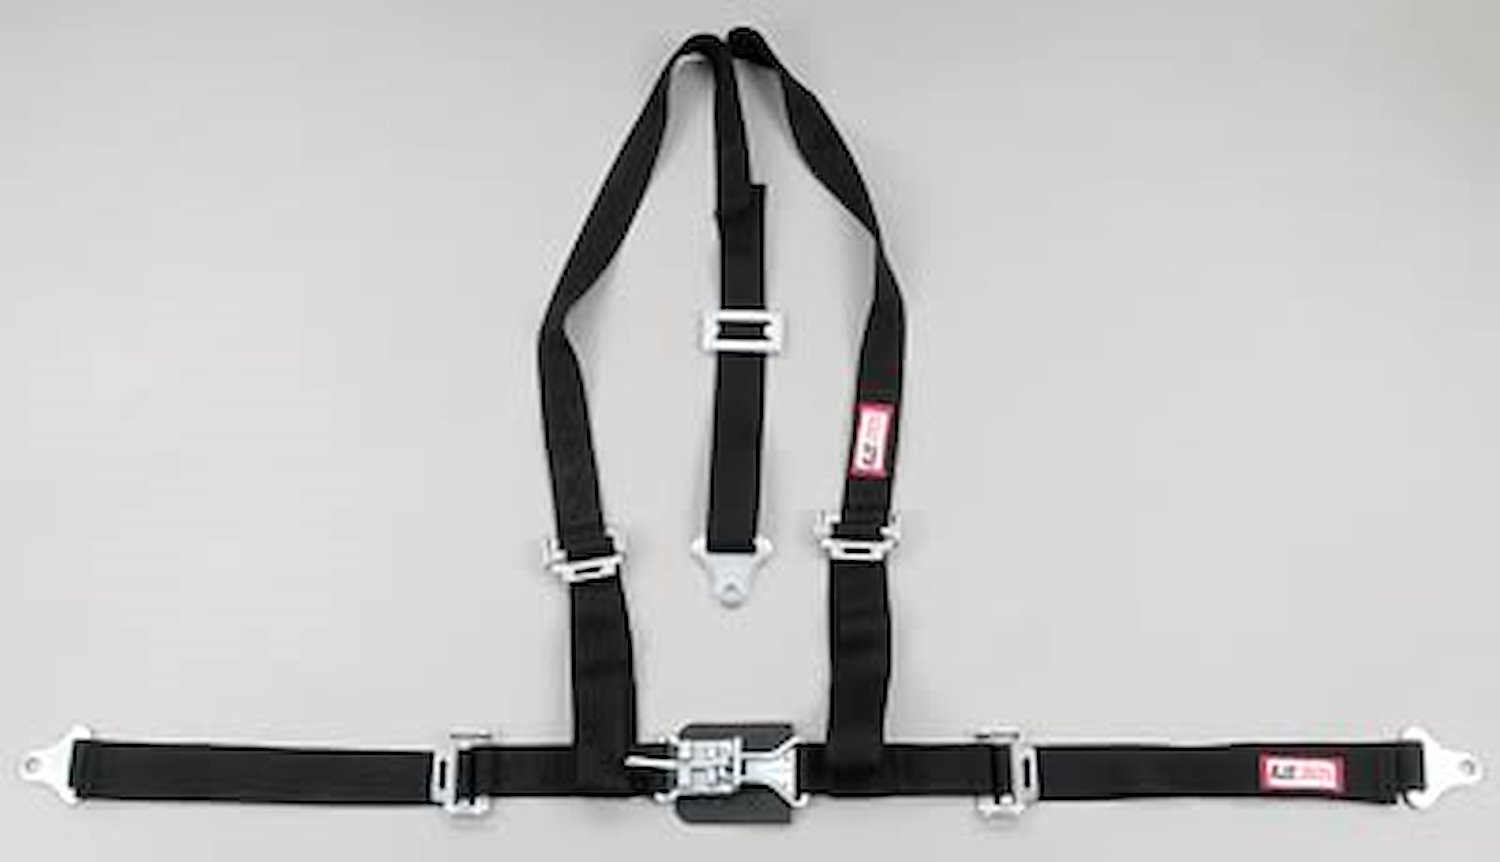 NON-SFI L&L HARNESS 2 PULL UP Lap Belt SEWN IN 2 S.H. INDIVIDUAL FLOOR Mount w/STERNUM STRAP ALL WRAP ENDS ORANGE